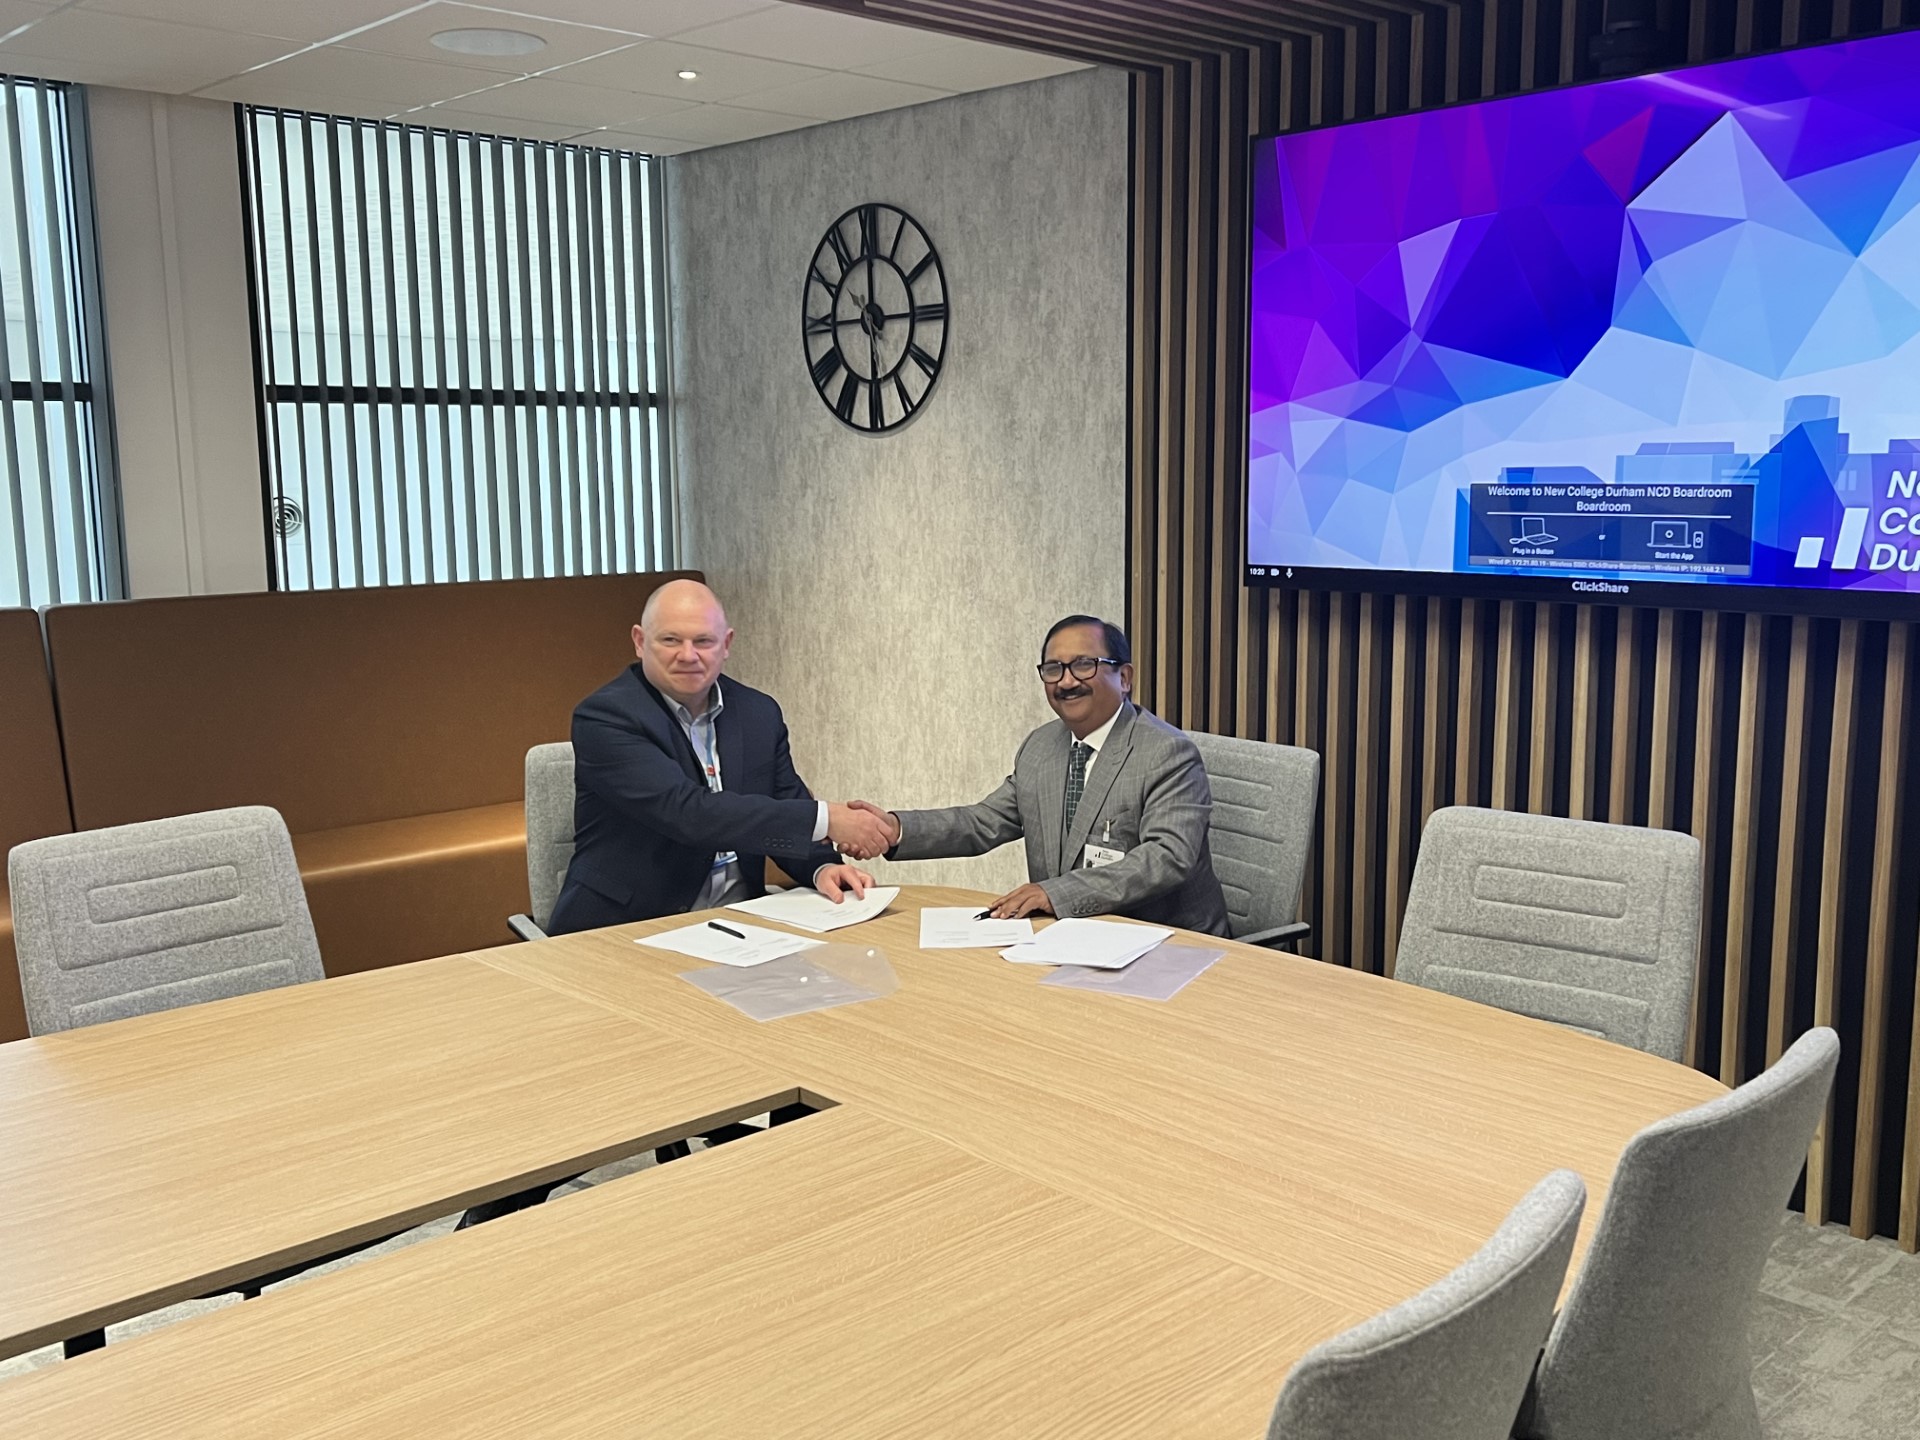 Andy Broadbent, Principal and CEO of 91, and Dr Padmesh Gupta, Managing Director of Oxford Business College, seal the new partnership